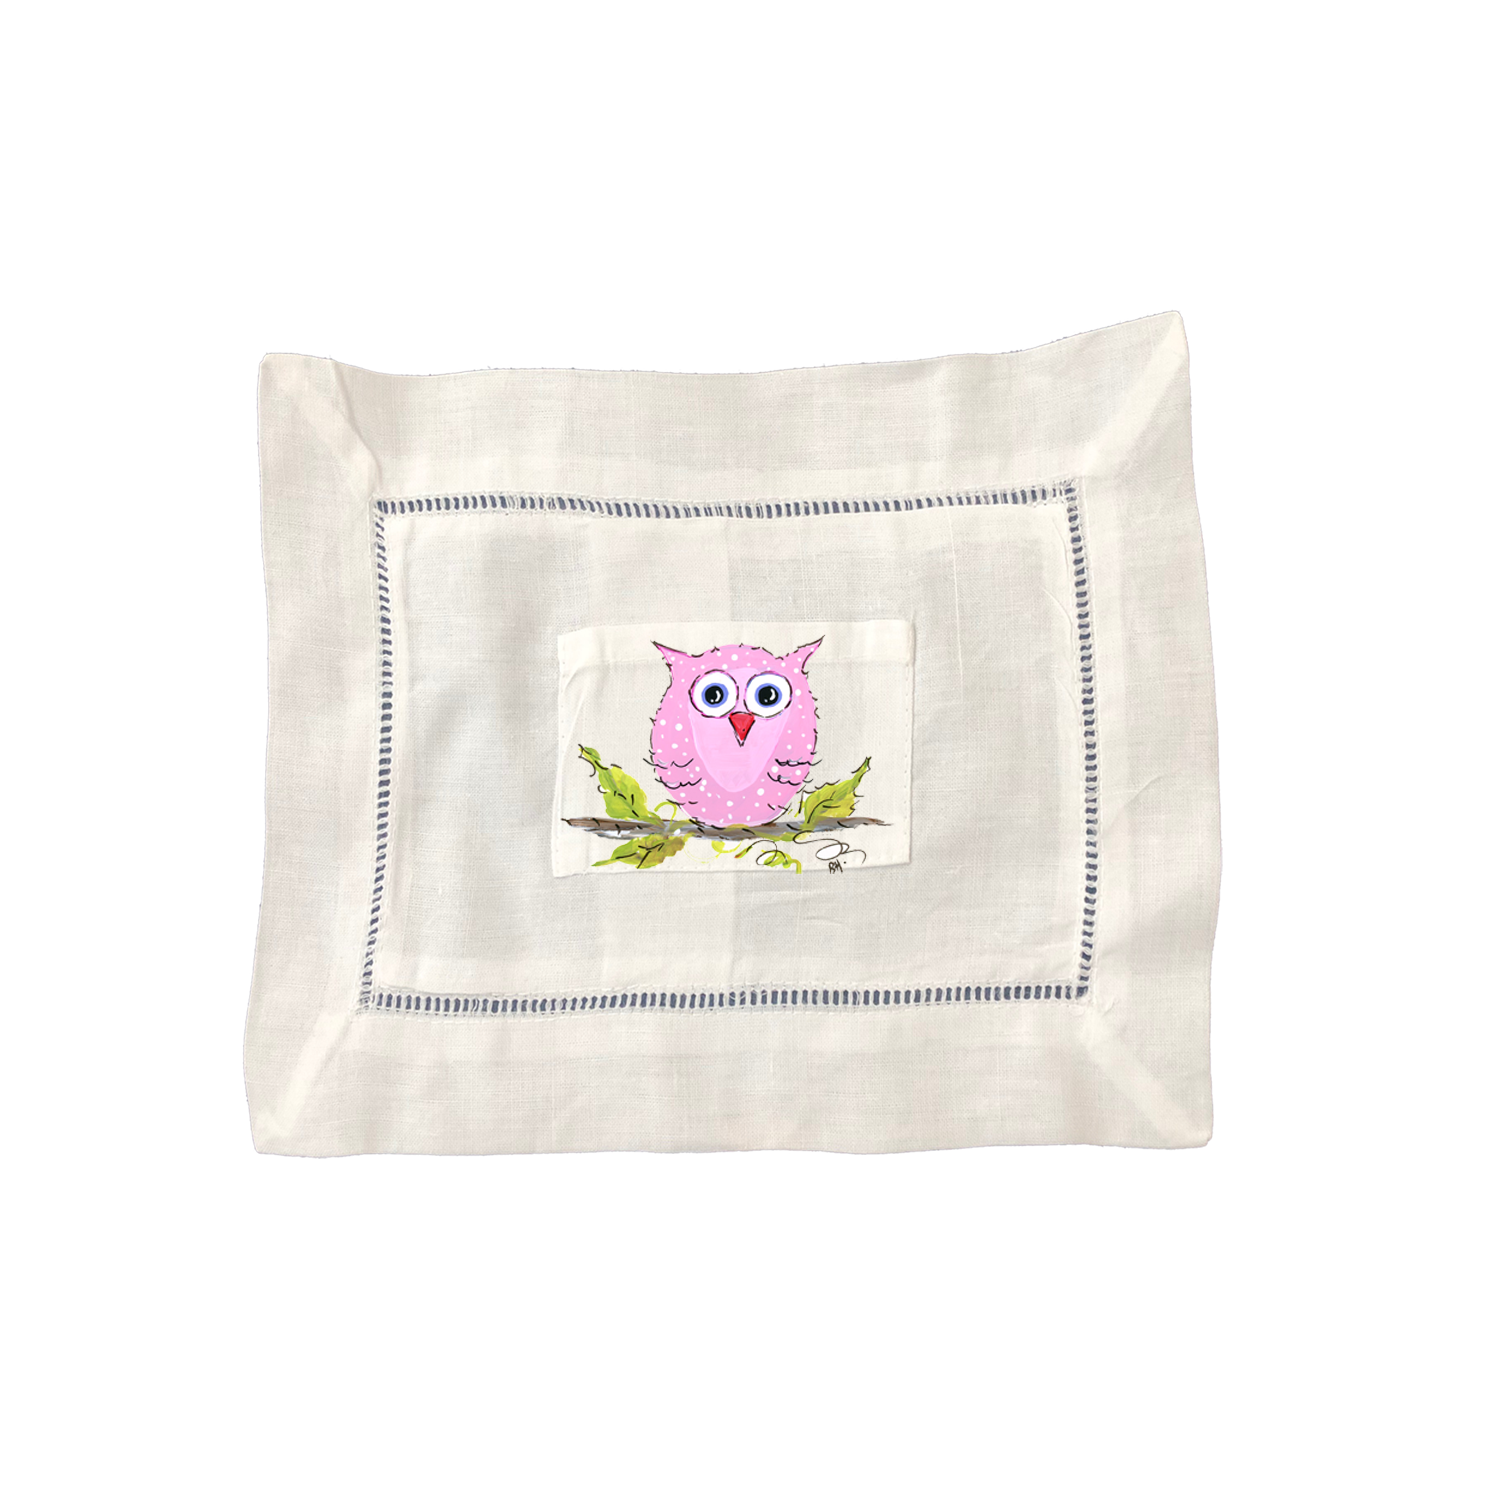 Large Tooth Fairy Pillow Pink Owl- TF932